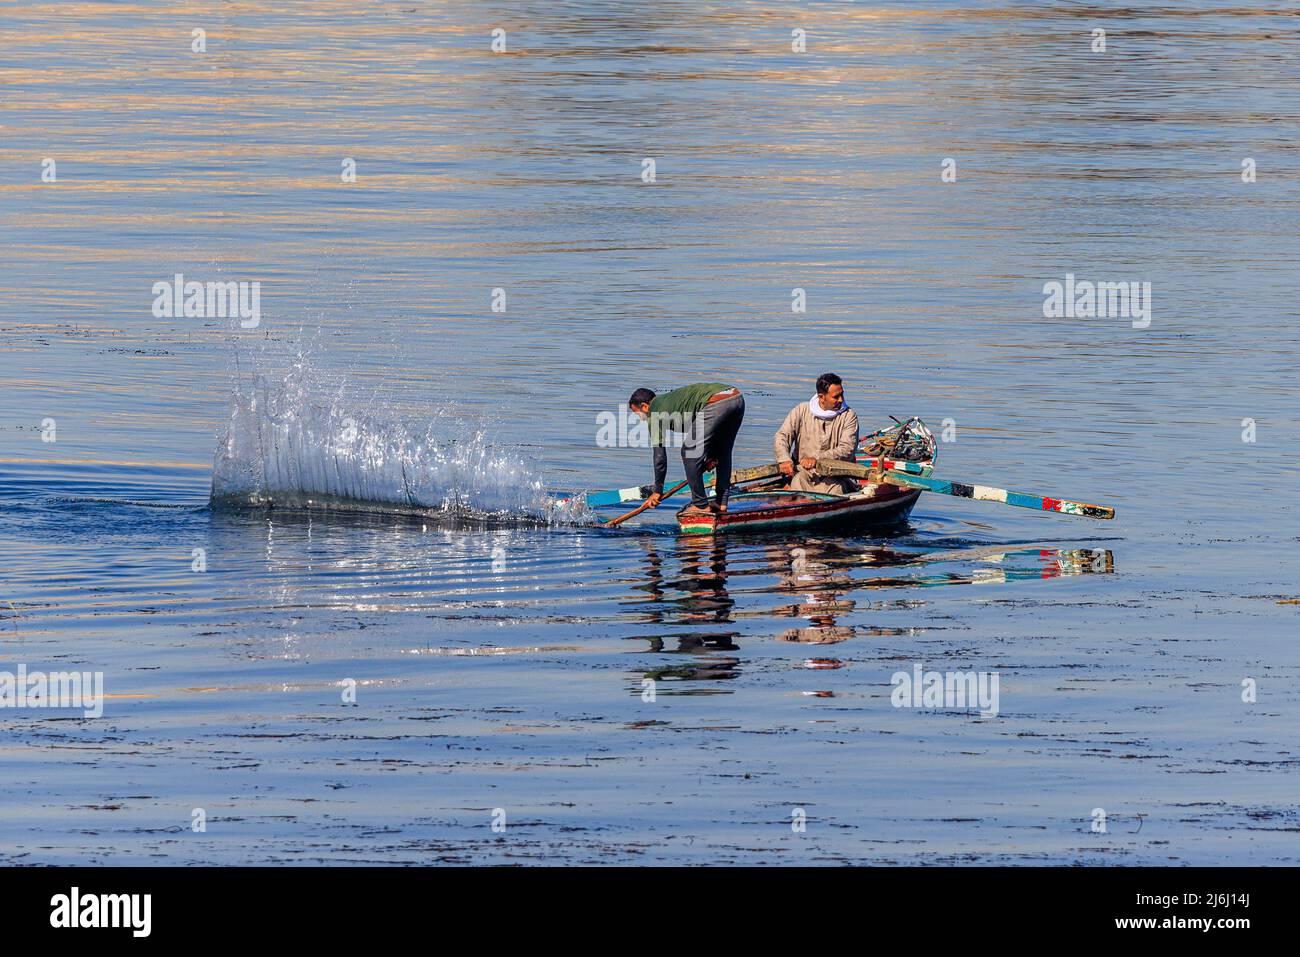 traditional fishing on the river nile in egypt by striking the water with a long pole to drive fish into nets from a low rowing boat Stock Photo